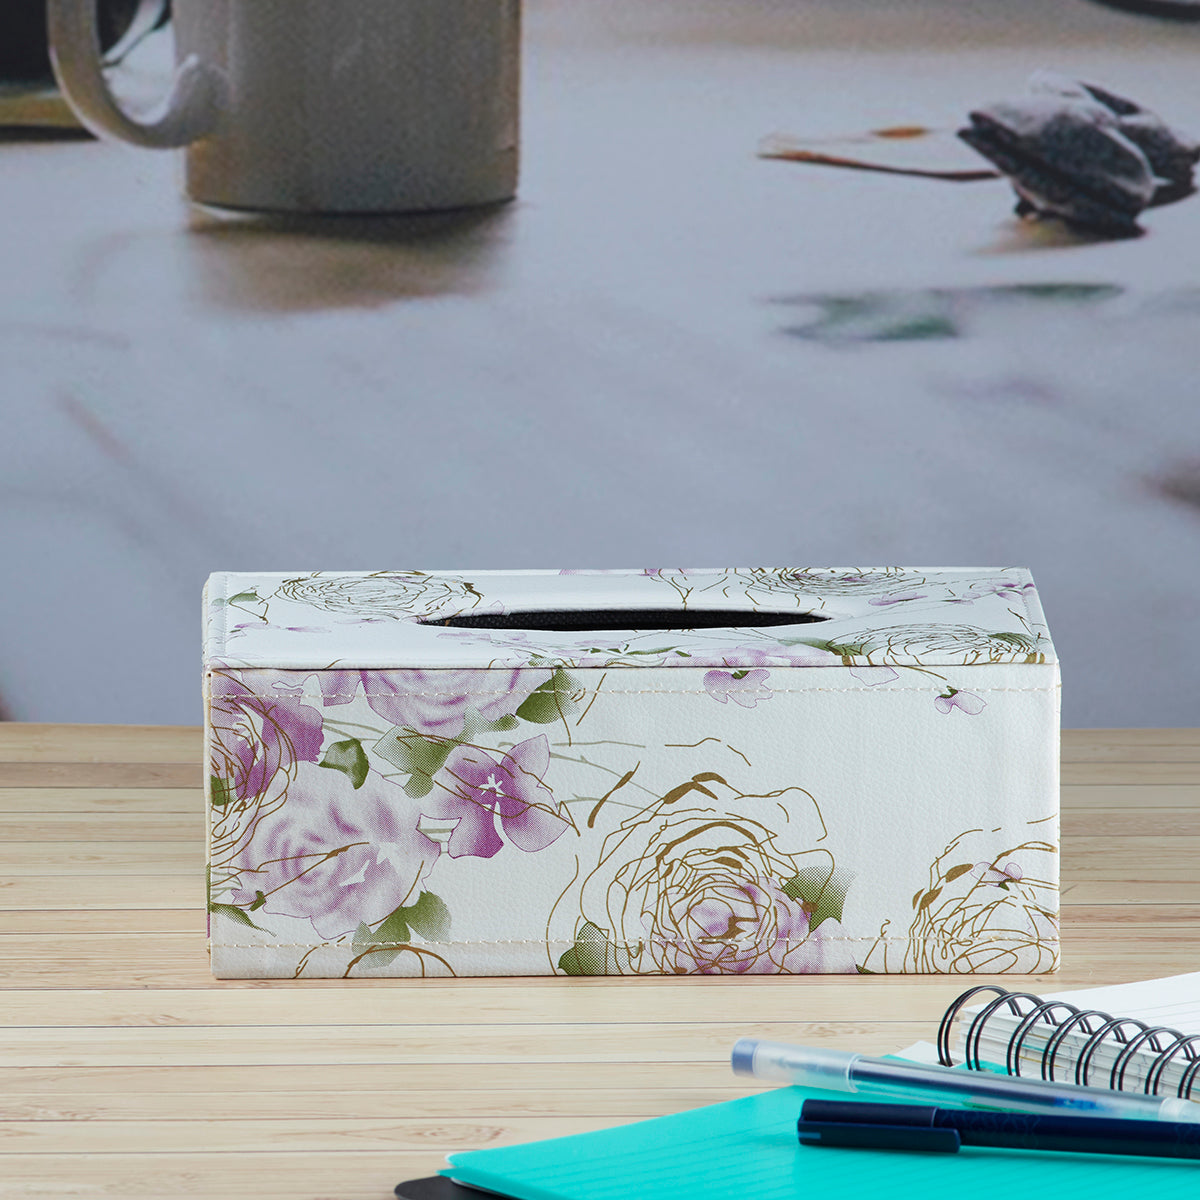 PU Leather Tissue Box Holder of Tissue Paper, Napkin, Rectangle (D-1-A)